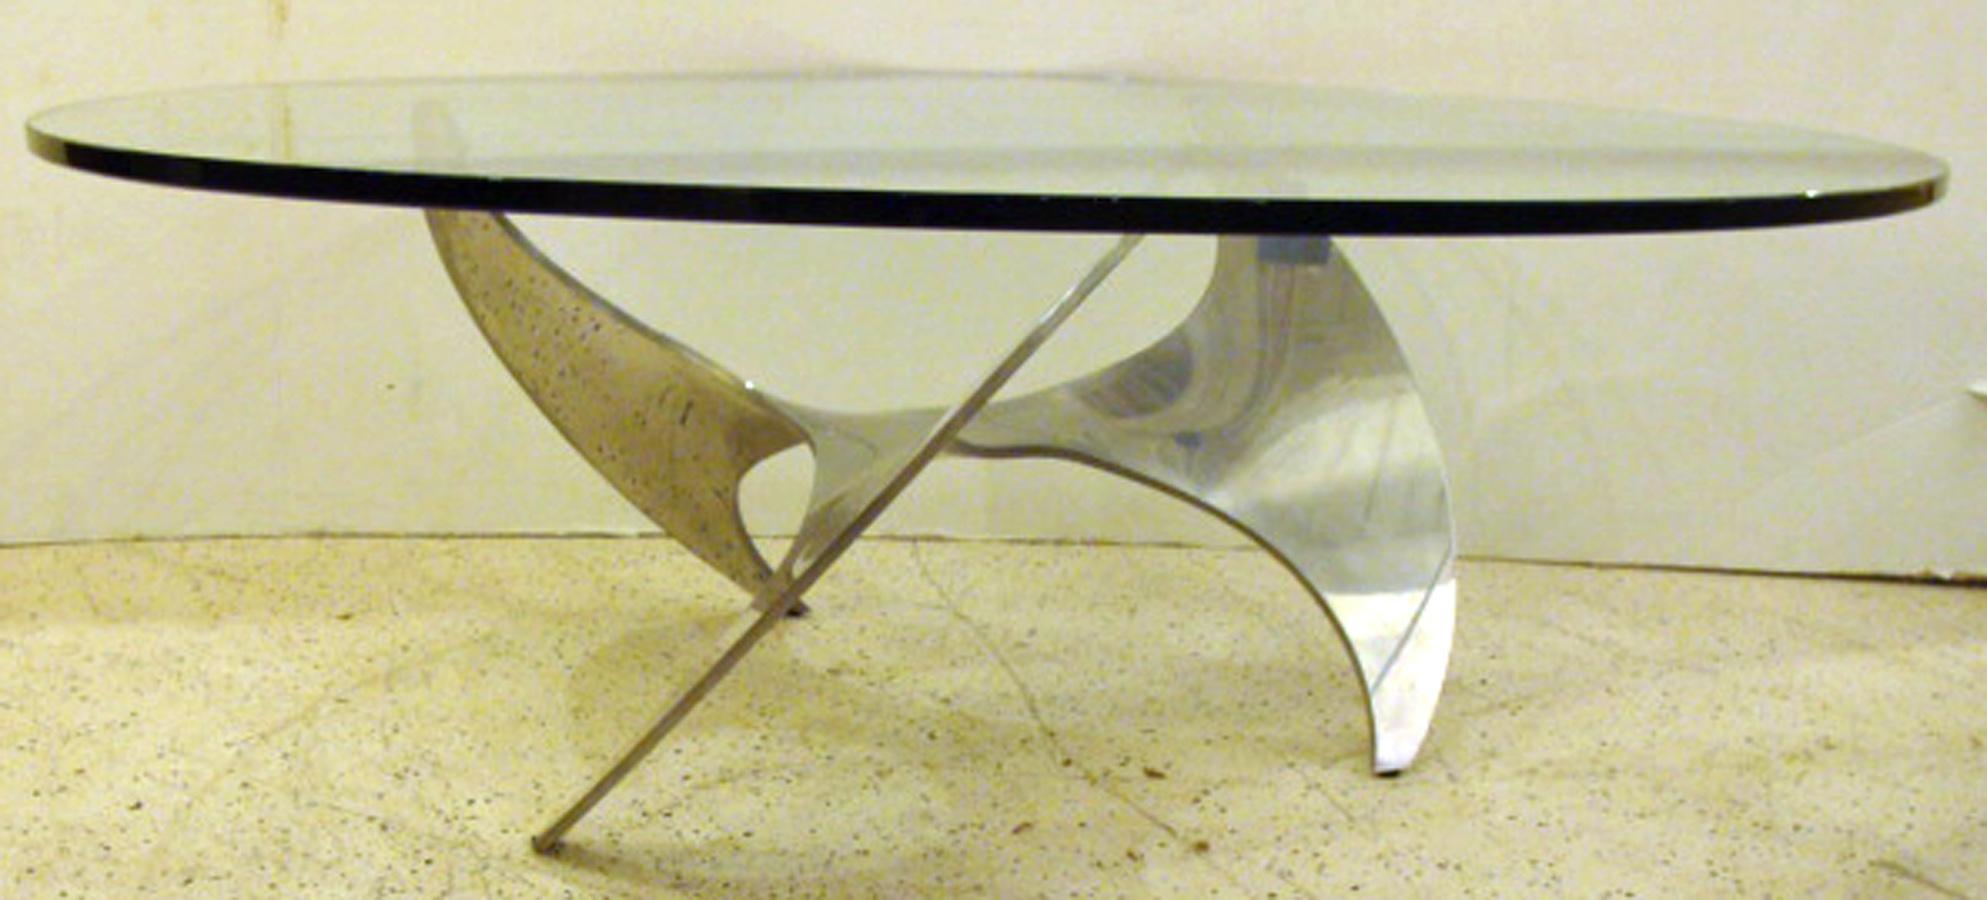 Knut Hesterberg, important German Sculptor. 
Vintage coffee table in beautiful condition. Clear glass top on
aluminum base. Designed for Ronald Schmitt, 1964.

Note: aluminum is a natural 